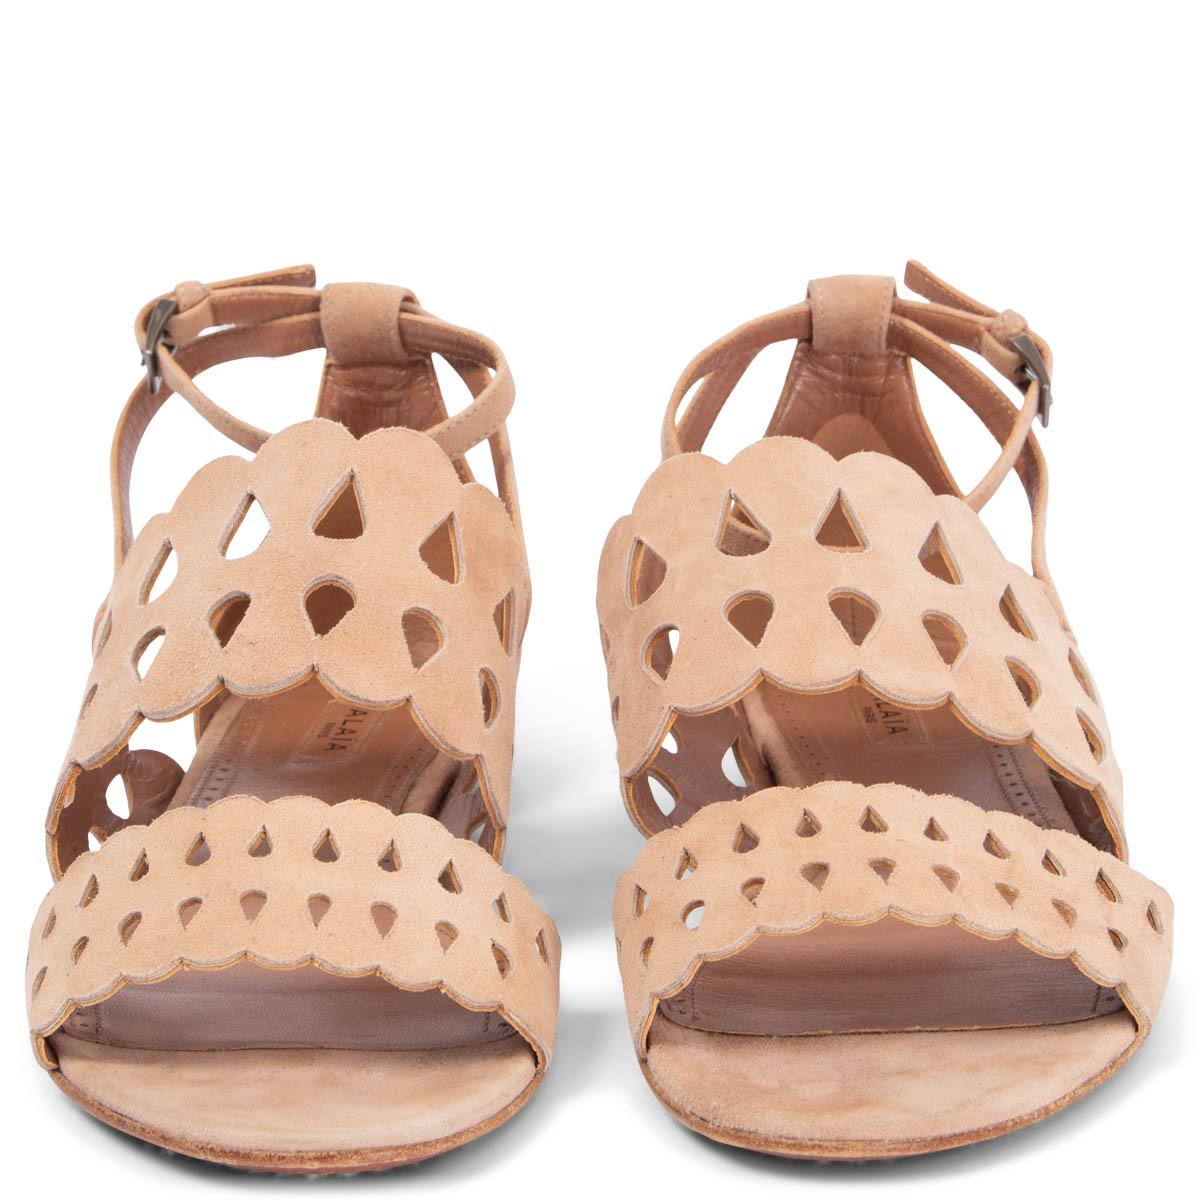 100% authentic Alaïa perforated laser-cut flats sandals in nude suede leather and ankle-strap closure. Have been worn and are in excellent condition. 

Measurements
Imprinted Size	37
Shoe Size	37
Inside Sole	24cm (9.4in)
Width	8cm (3.1in)

All our